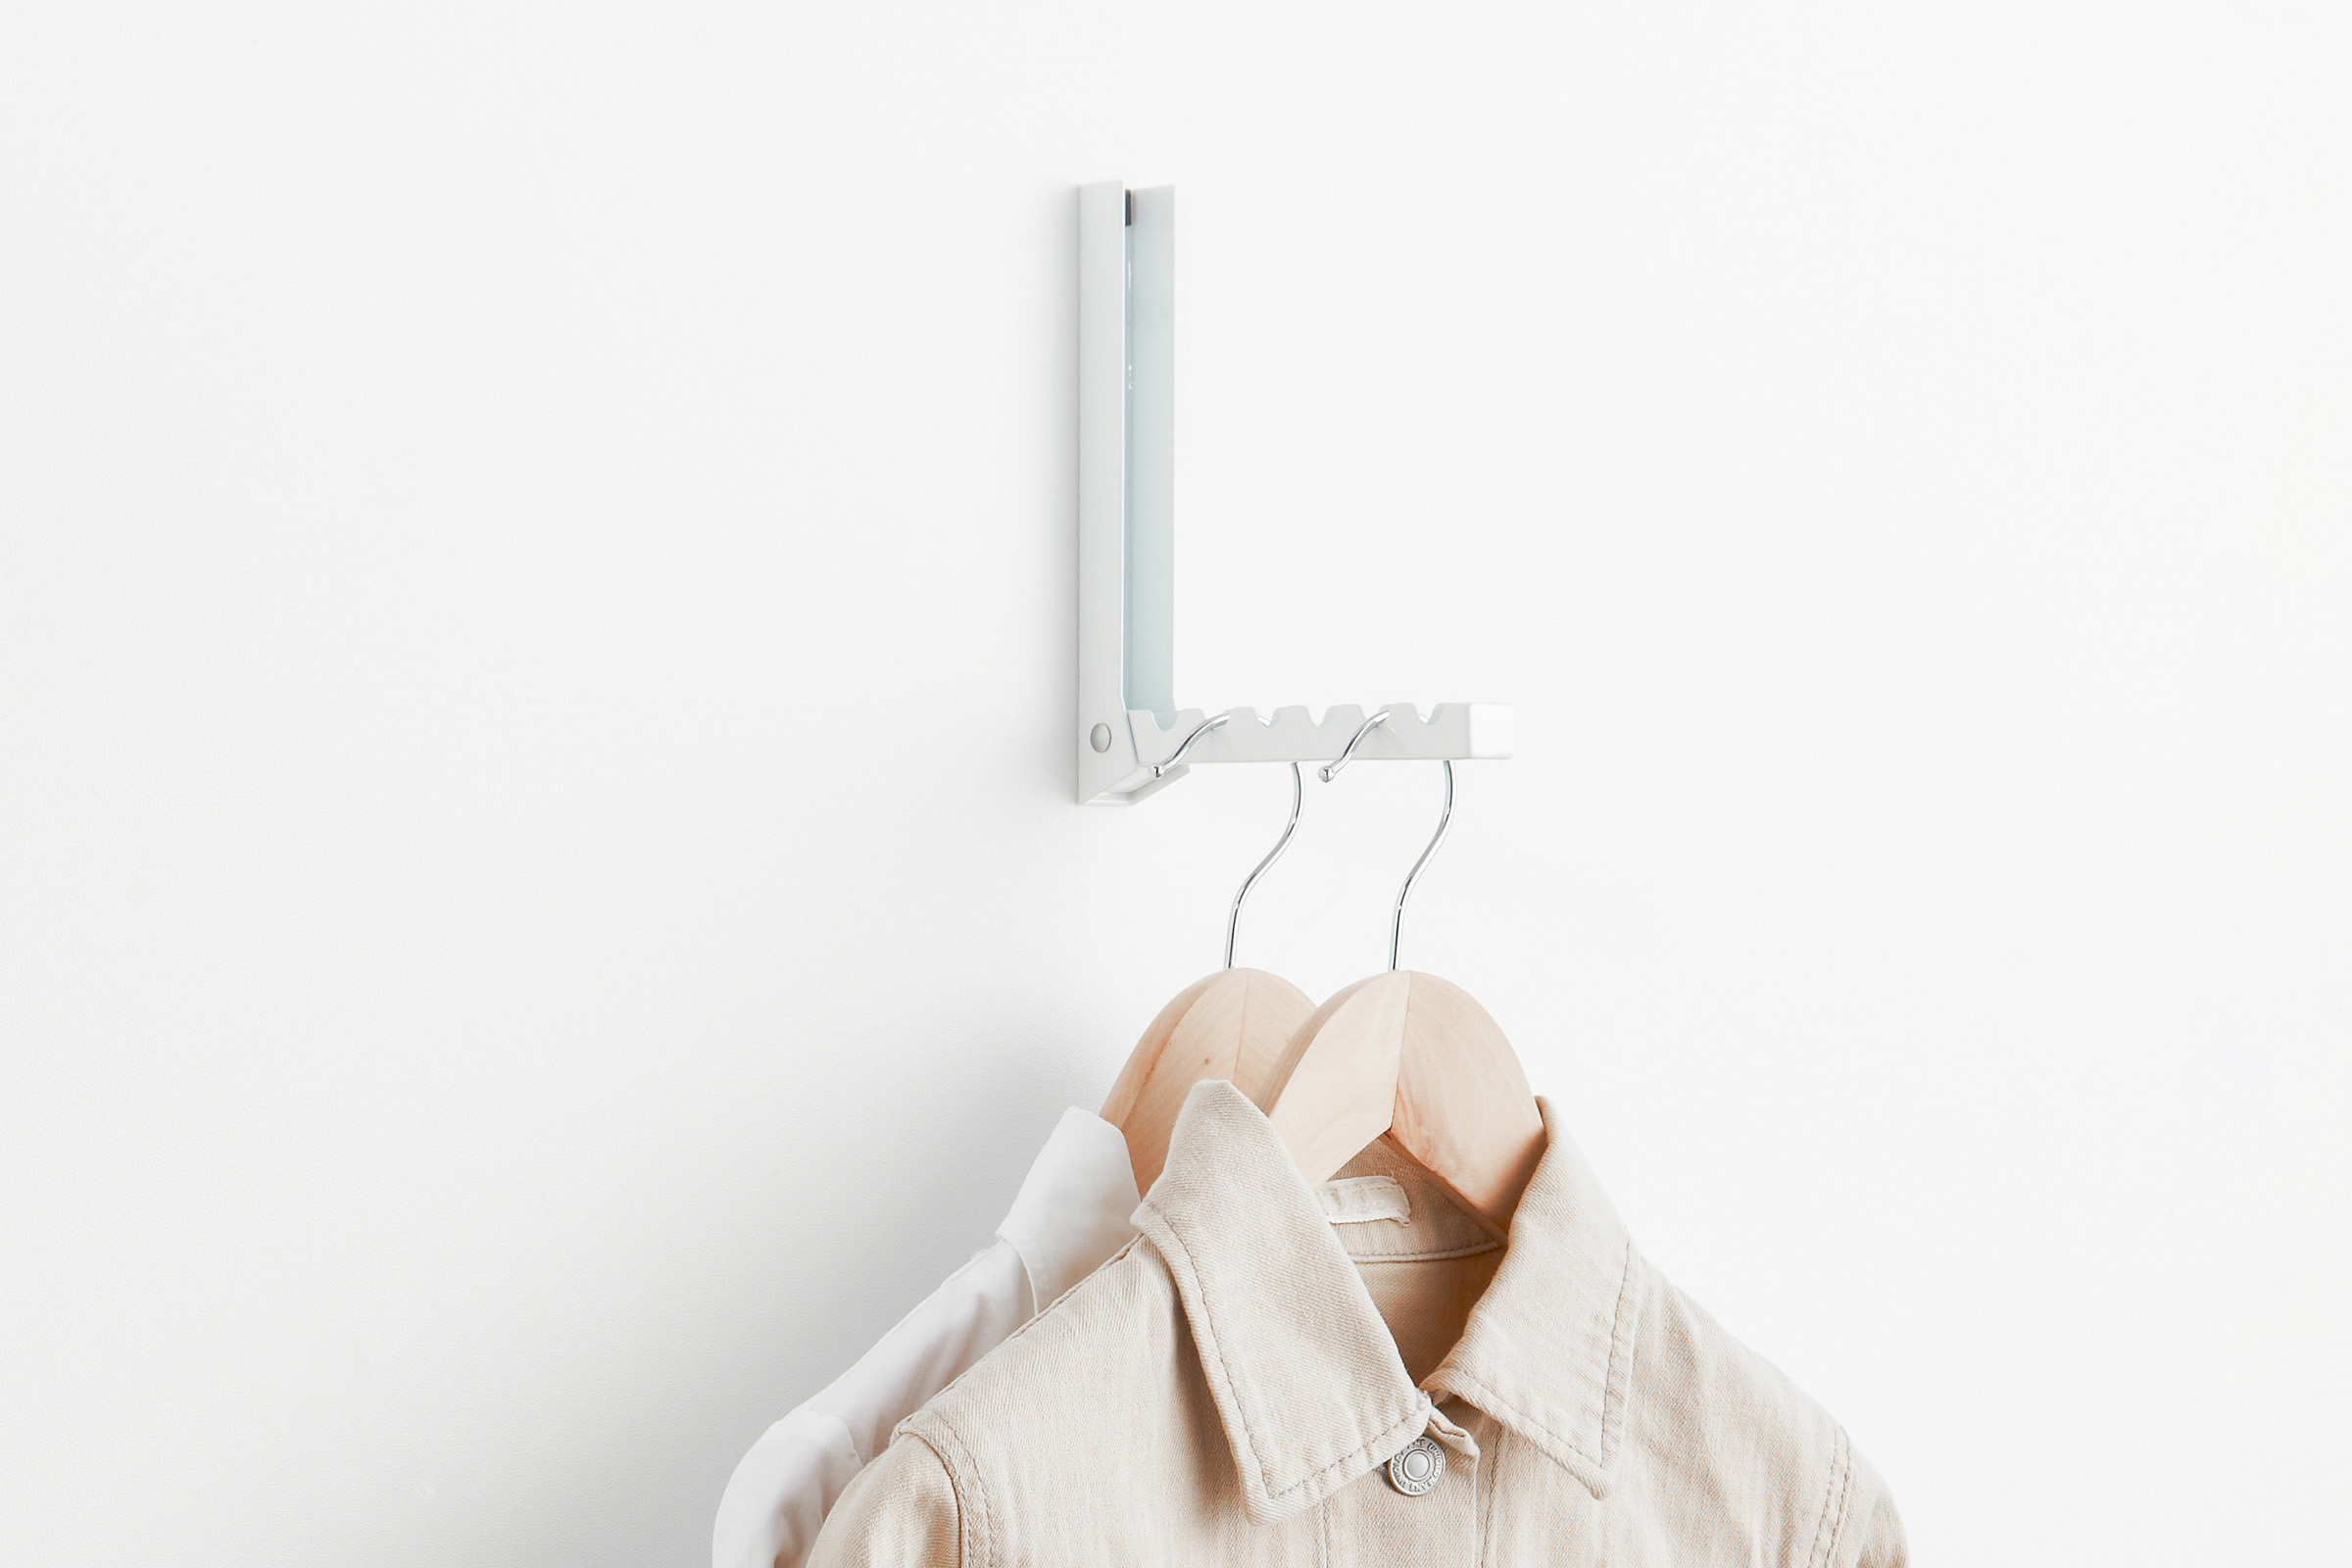 Over-the-Door Hook by Yamazaki Home in white on a wall, holding two hangers with clothing items.